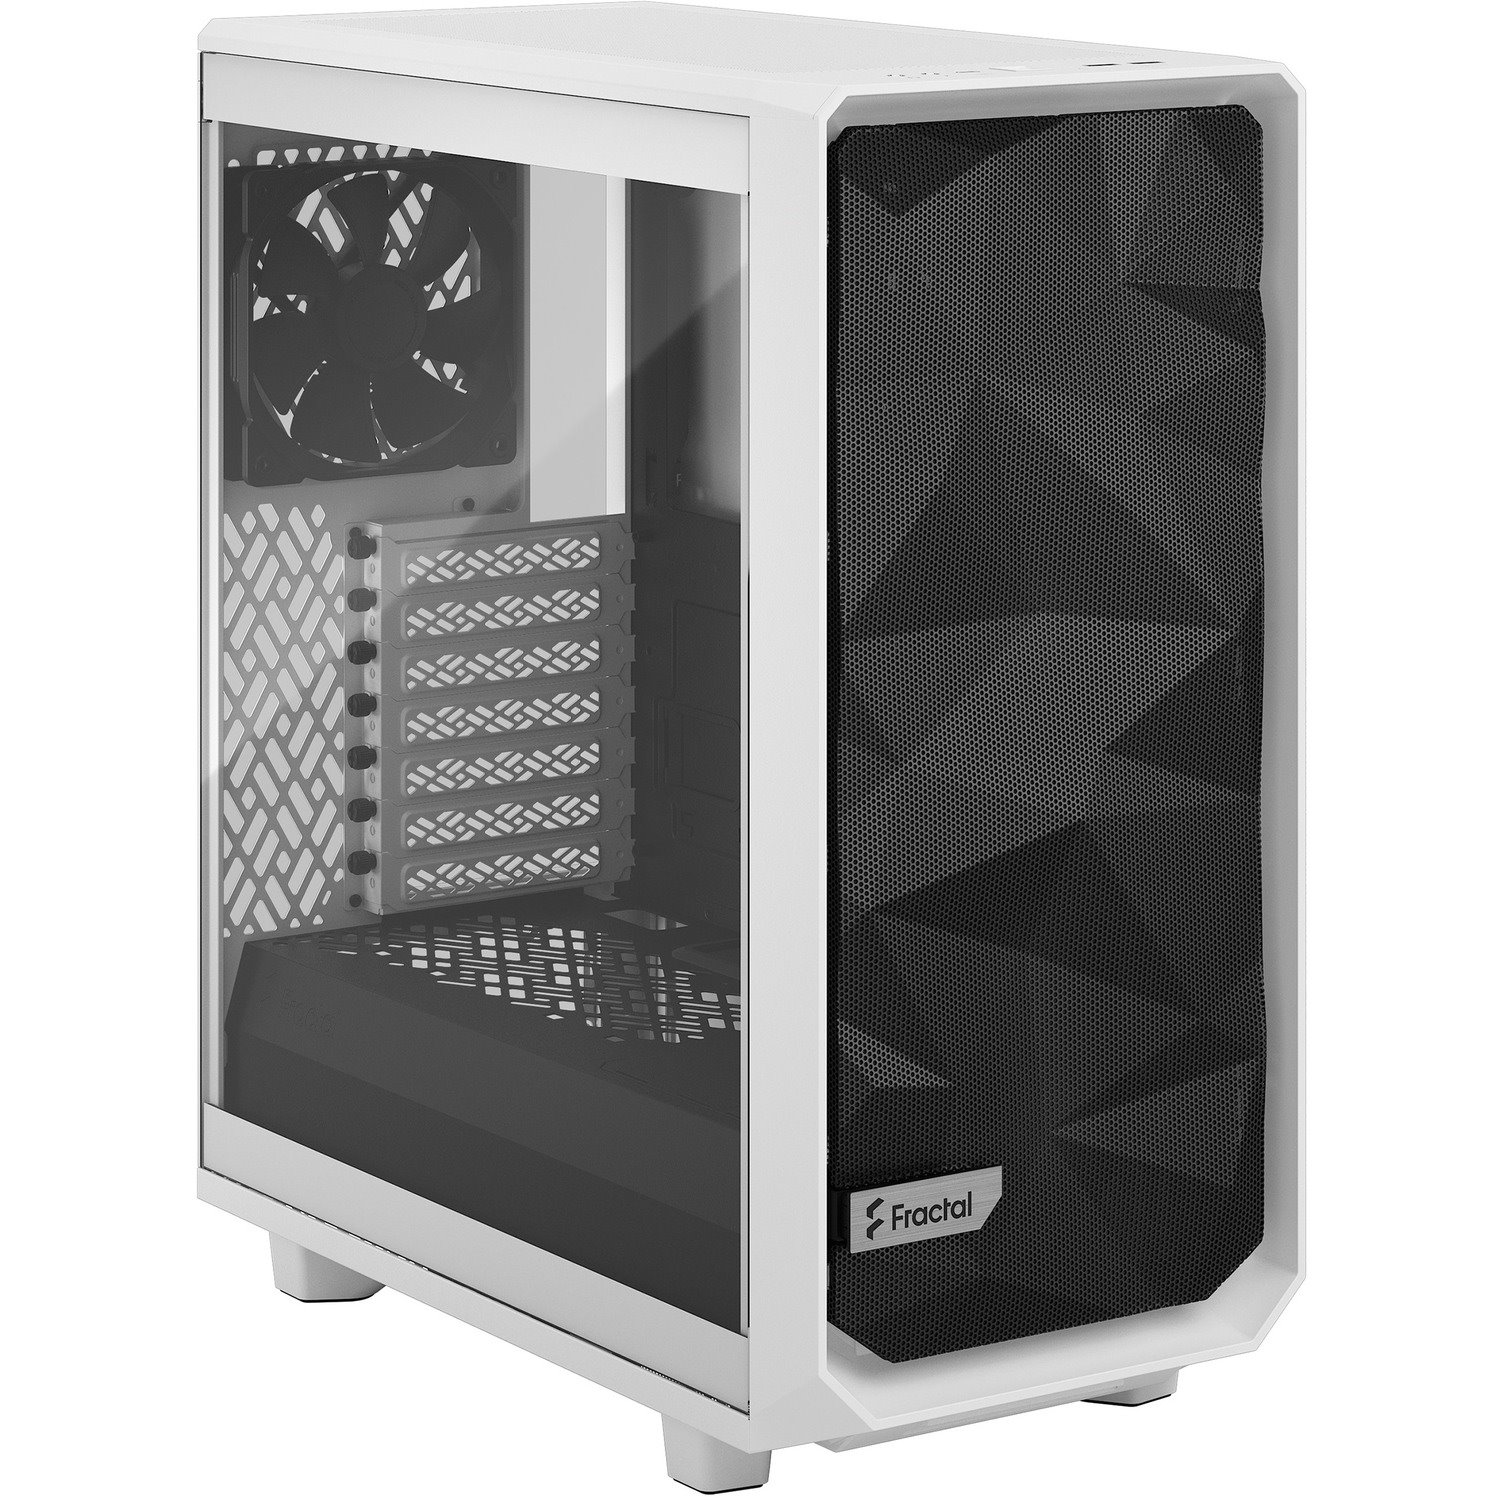 Fractal Design Meshify 2 Compact Computer Case - ATX Motherboard Supported - Mid-tower - Tempered Glass, Steel, Mesh - White